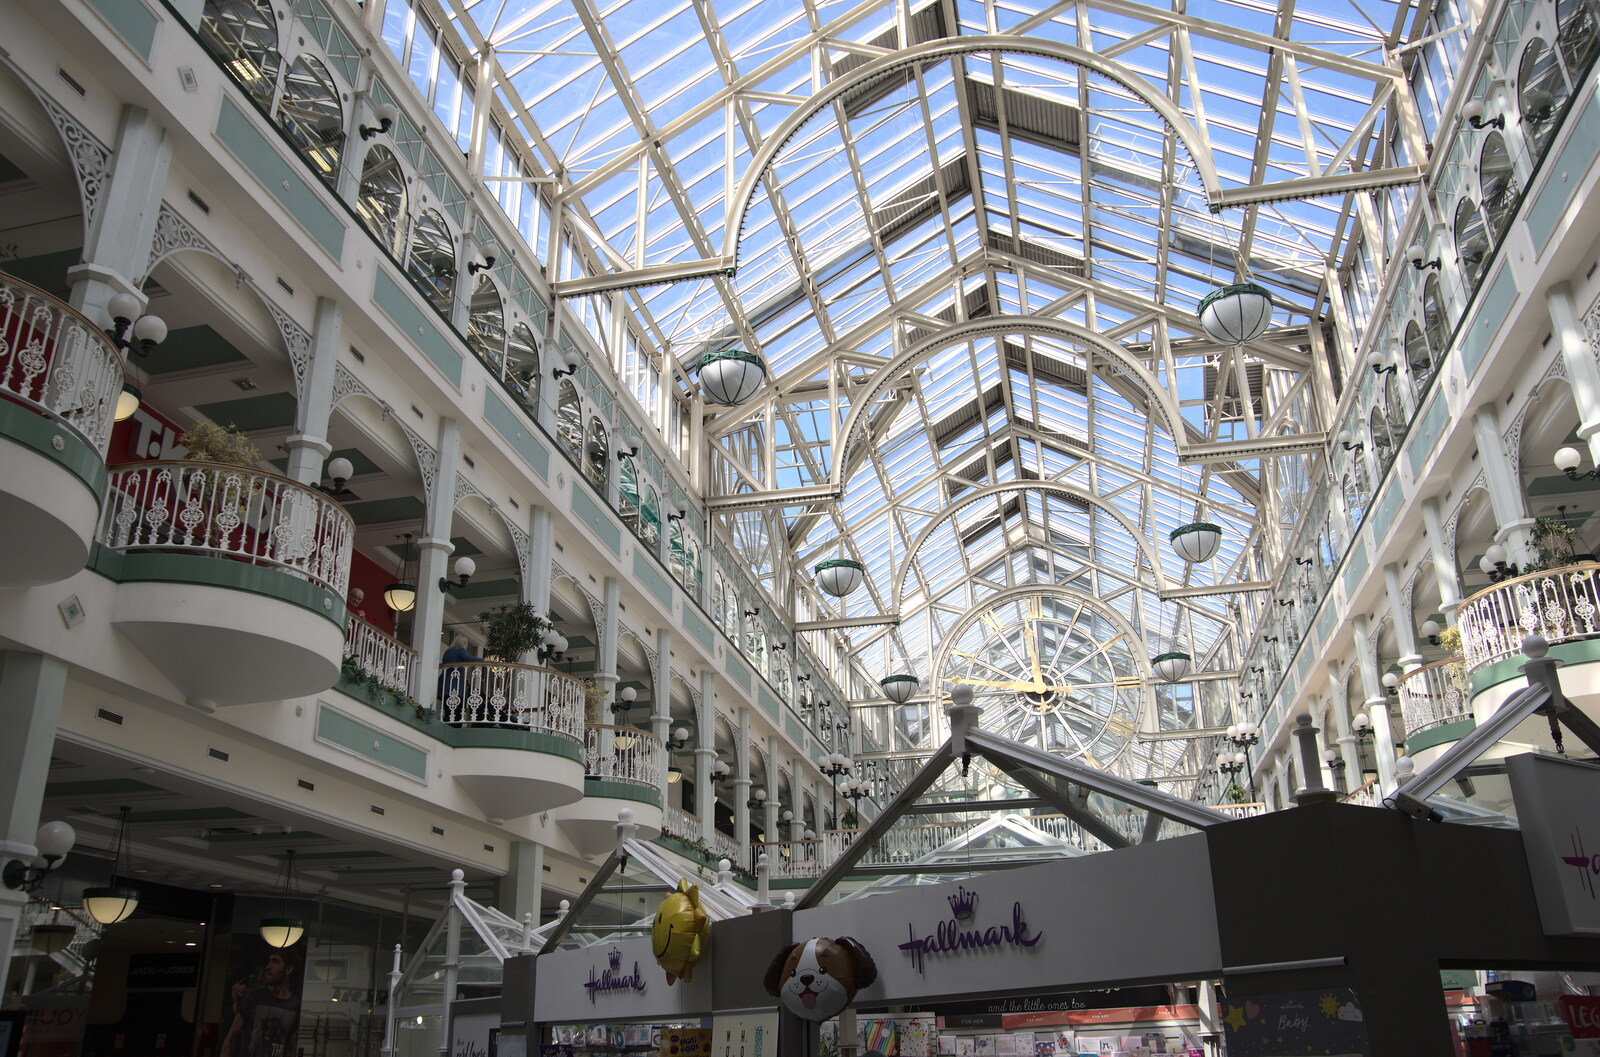 Blackrock North and South, Louth and County Dublin, Ireland - 23rd April 2022: Stephen's Green shopping centre